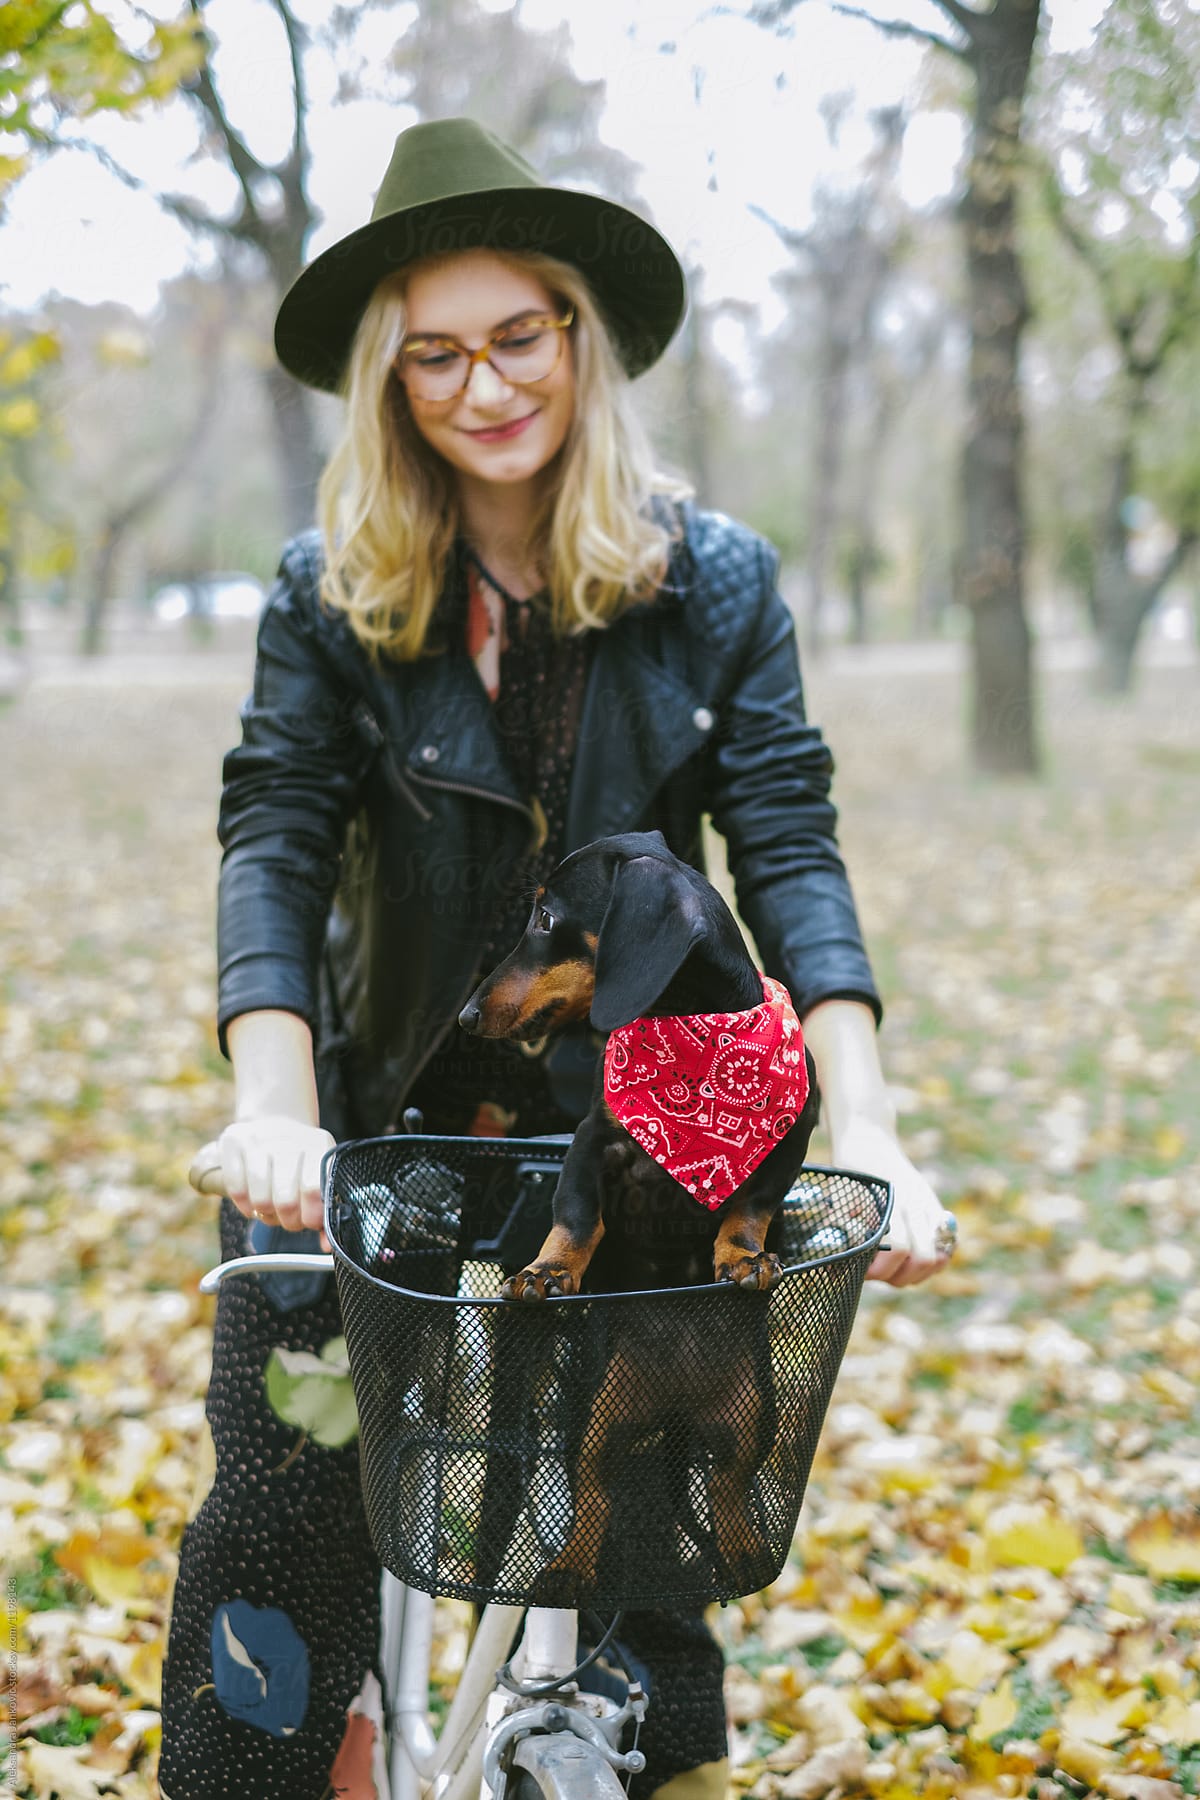 Young Woman Riding Bicycle With Dachshund Puppy In The Basket by Stocksy  Contributor Aleksandra Jankovic - Stocksy